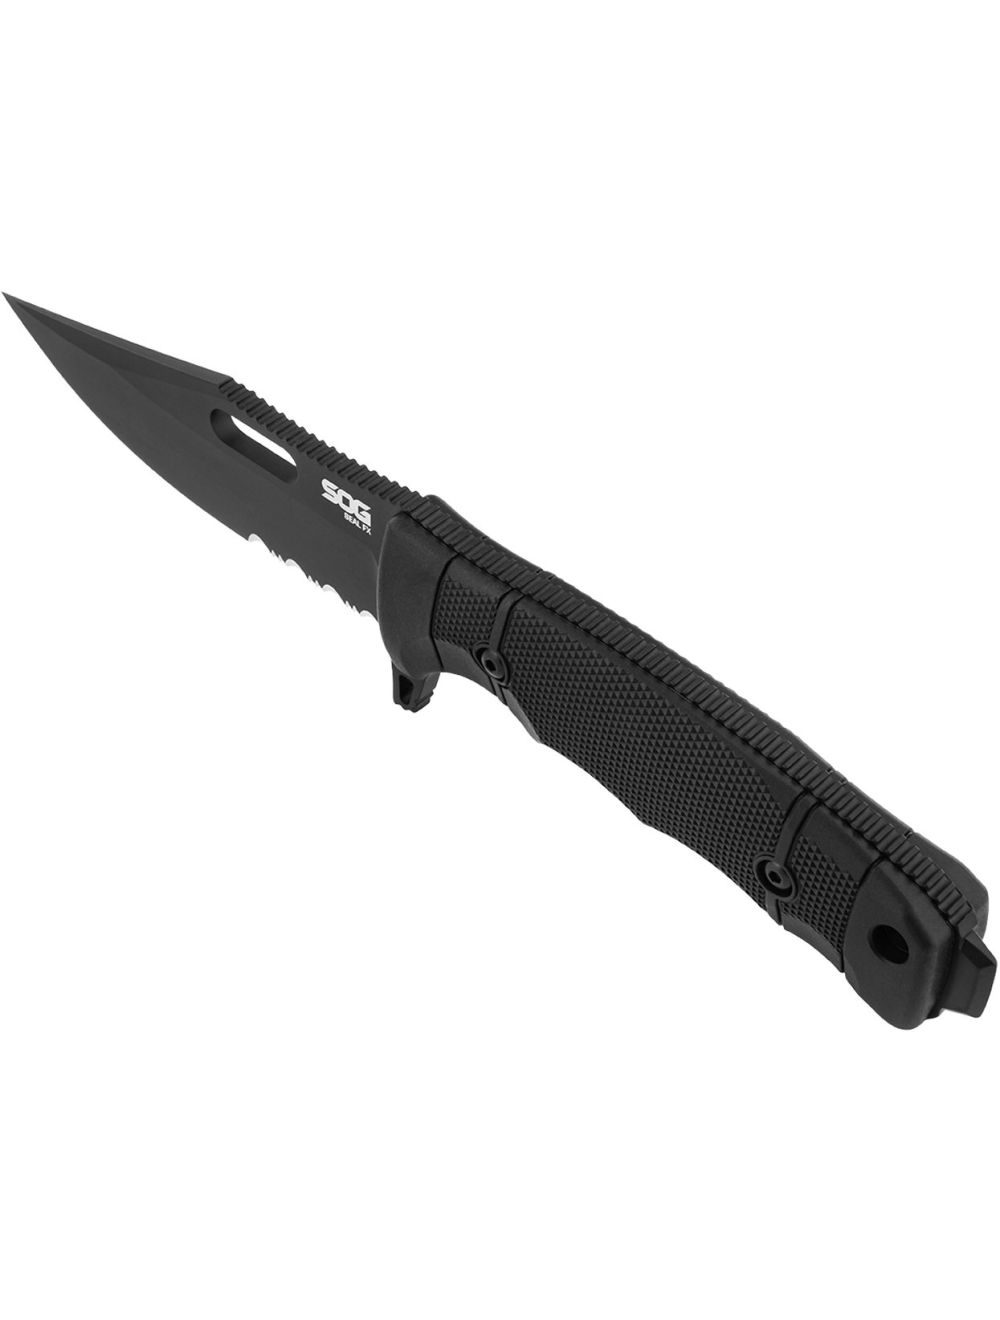 SEAL FX Partially Serrated